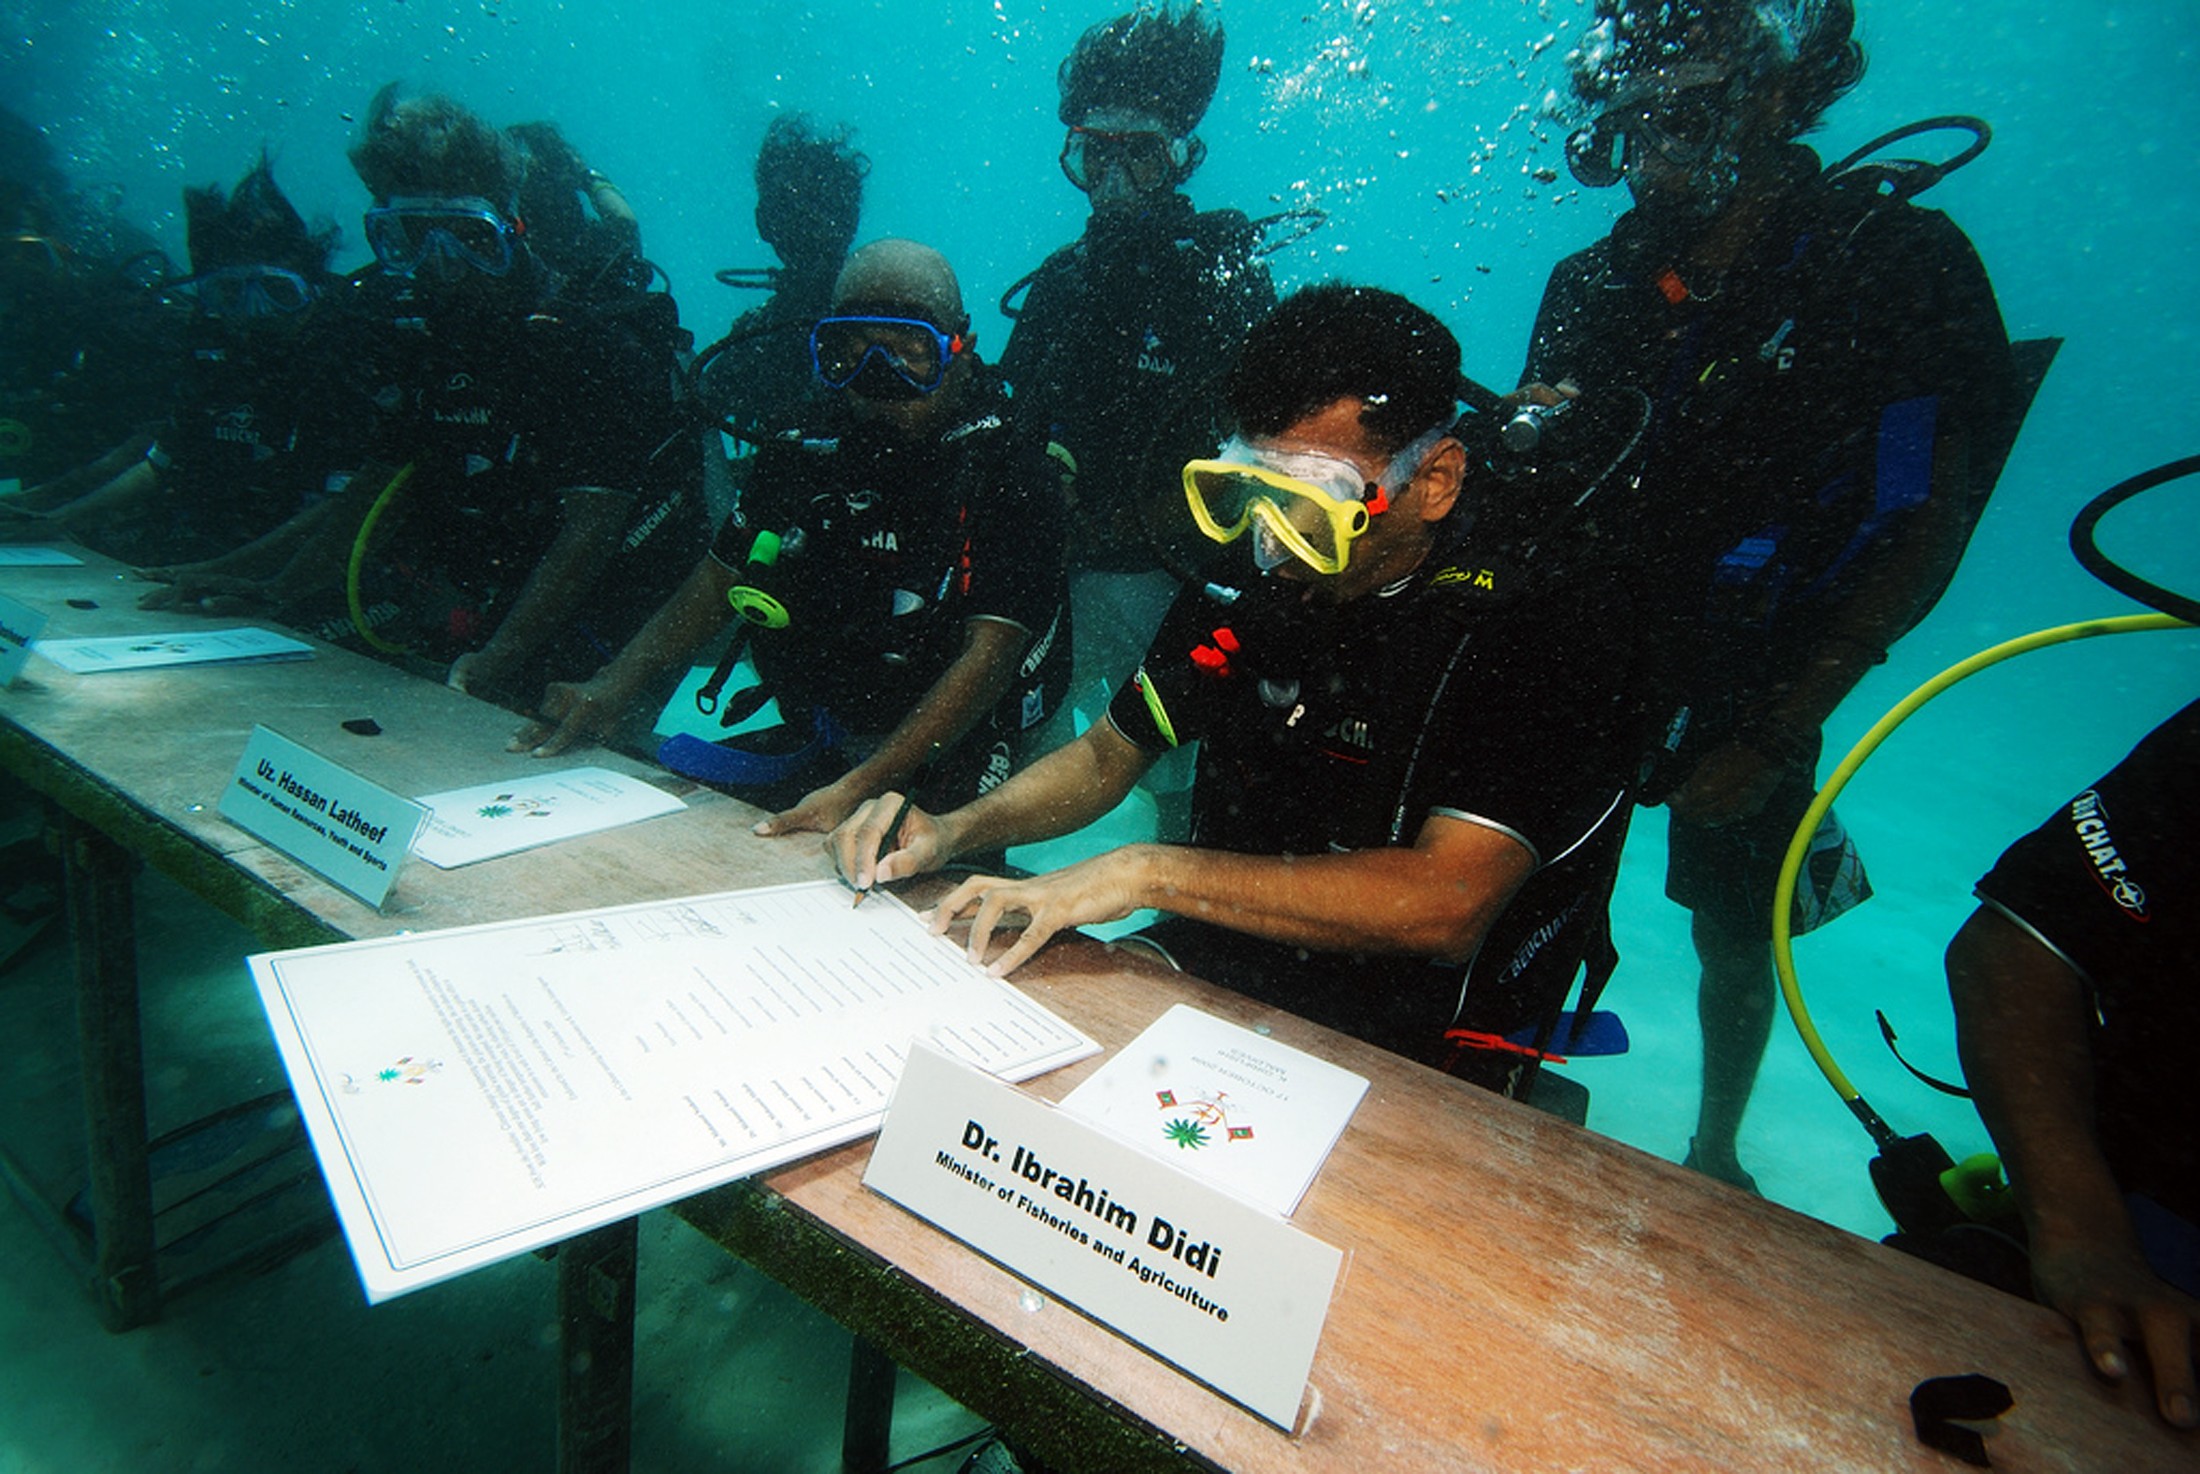 Ibrahim Didi, Minister of Fisheries and Agriculture of the Maldives signed the decree of the underwater cabinet meeting off Girifushi Island on October 17, 2009. Ministers in full scuba gear met on the seabed to draw attention to the dangers of global warming for the island nation, a tourist paradise featuring coral reefs and white sand beaches with most parts lying less than one metre (3.3 feet) above sea level. Scientists have warned it could be uninhabitable in less than 100 years. Photo: Agence France-Presse